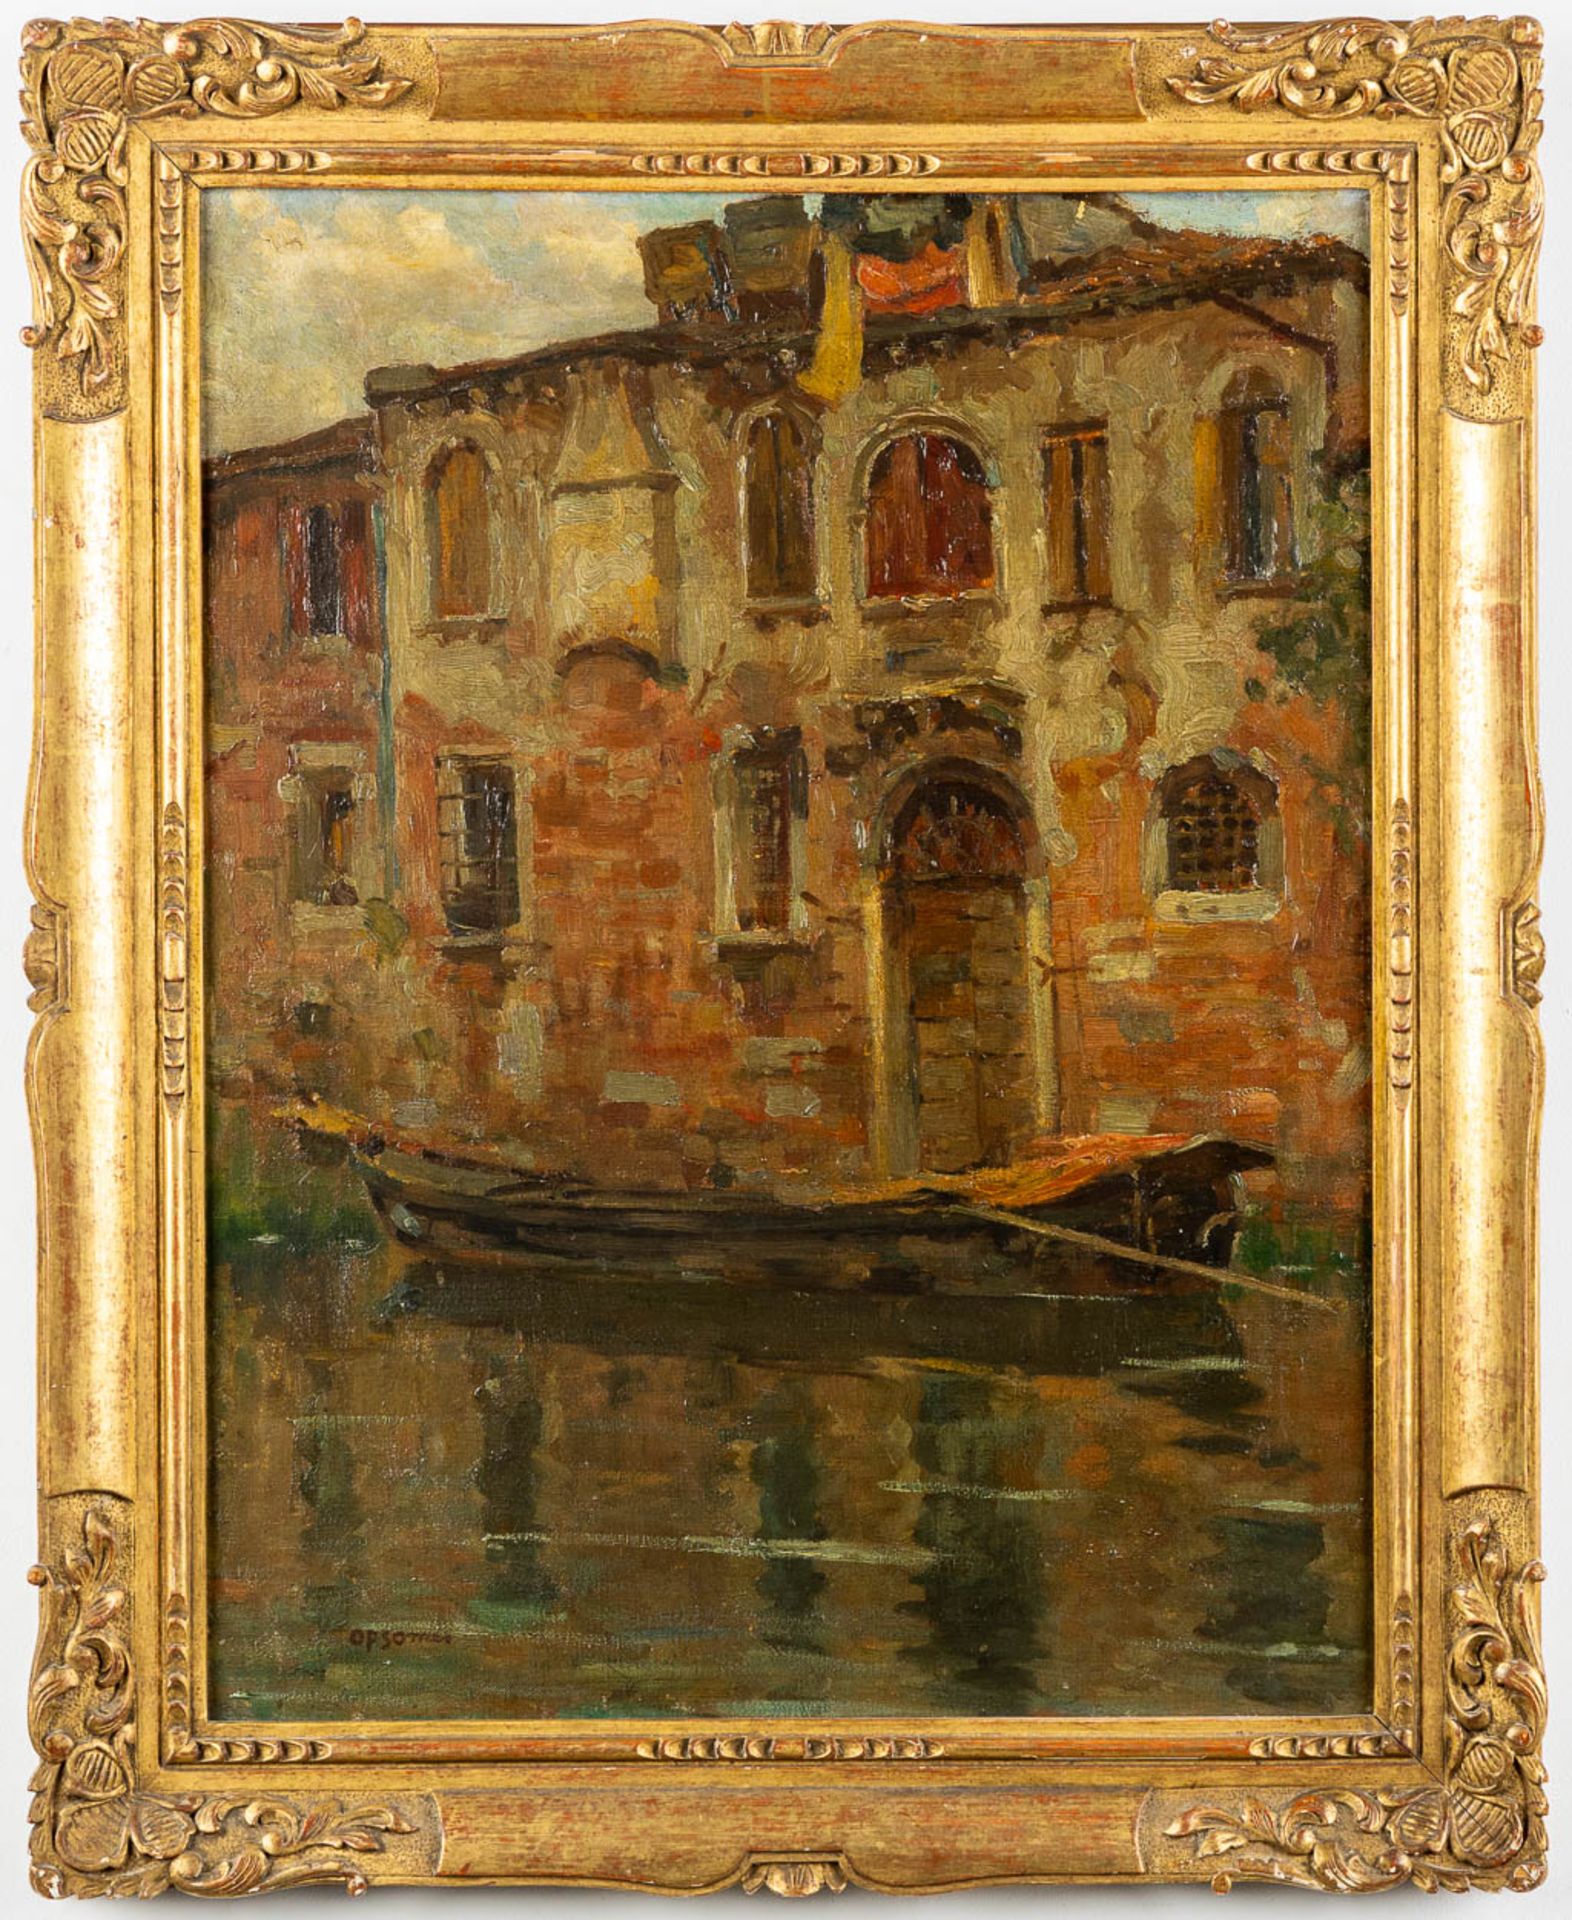 Isidore OPSOMER (1878-1967) 'Ship in the canal' oil on canvas. (W:50 x H:65 cm) - Image 3 of 6